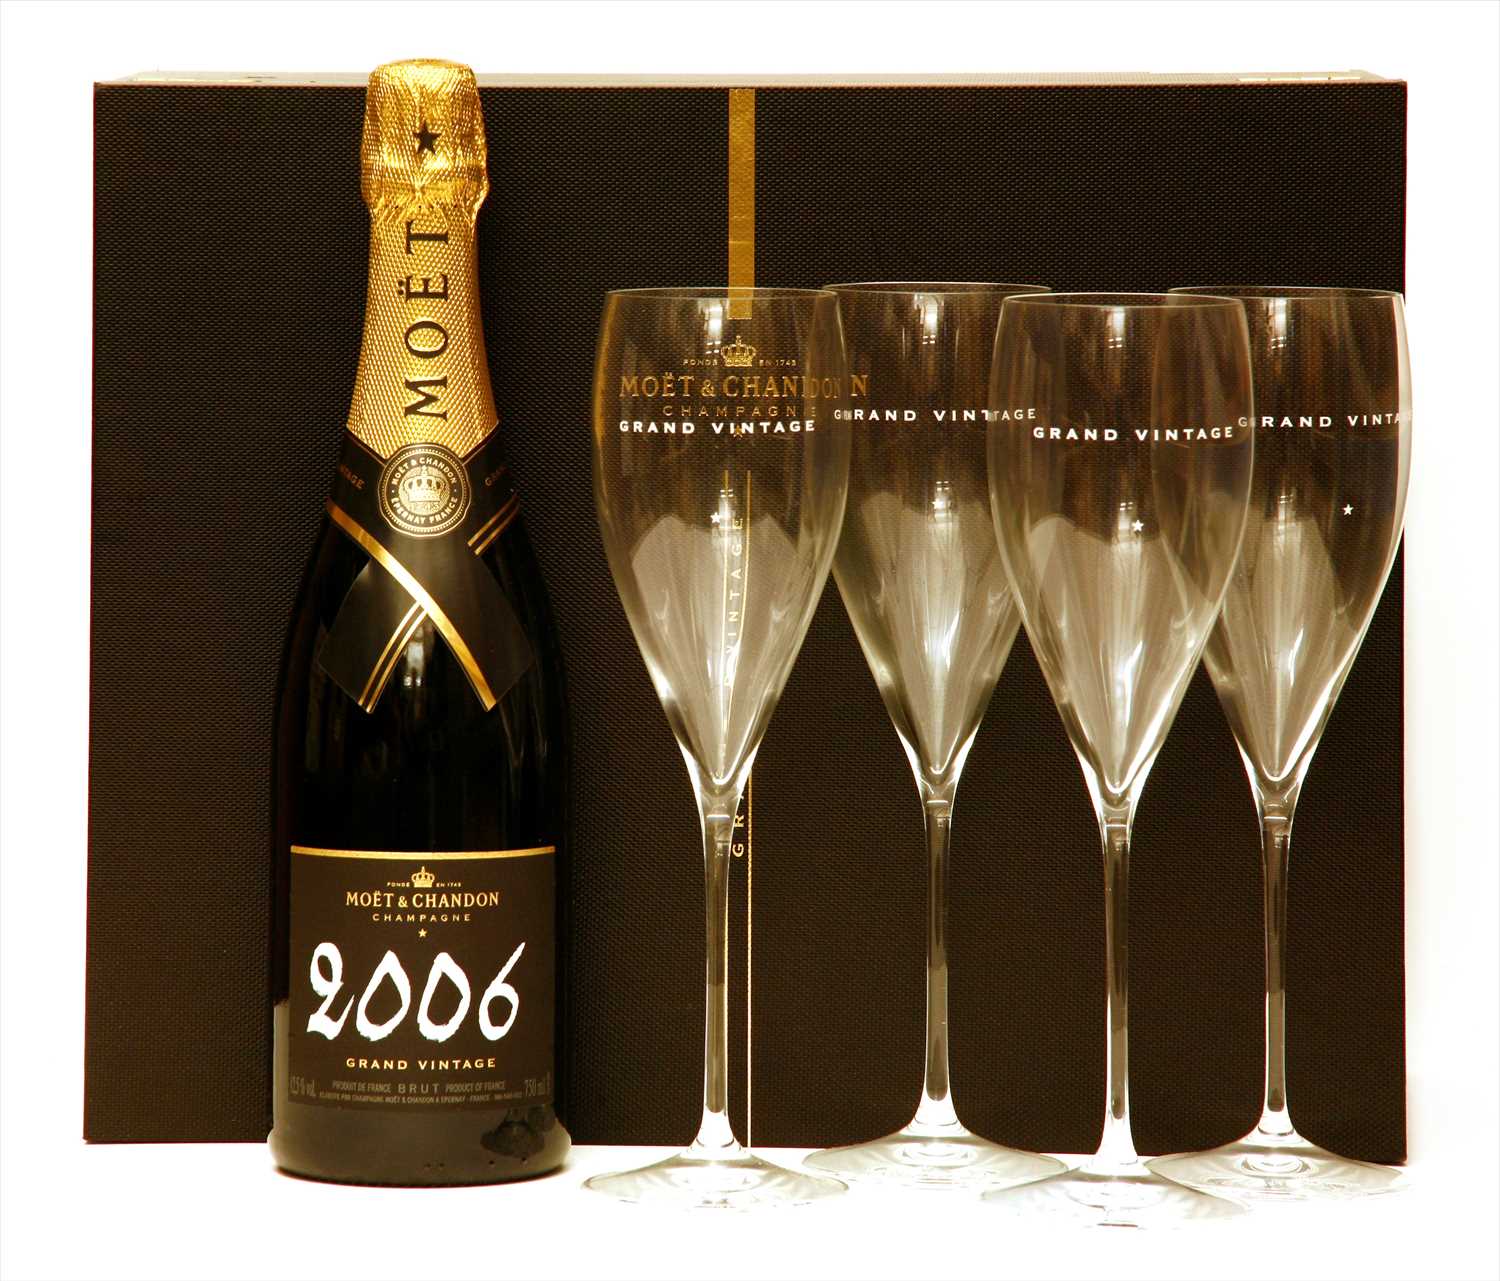 Lot 59 - Moët & Chandon, Grand Vintage, 2006, one bottle in presentation box with four champagne flutes